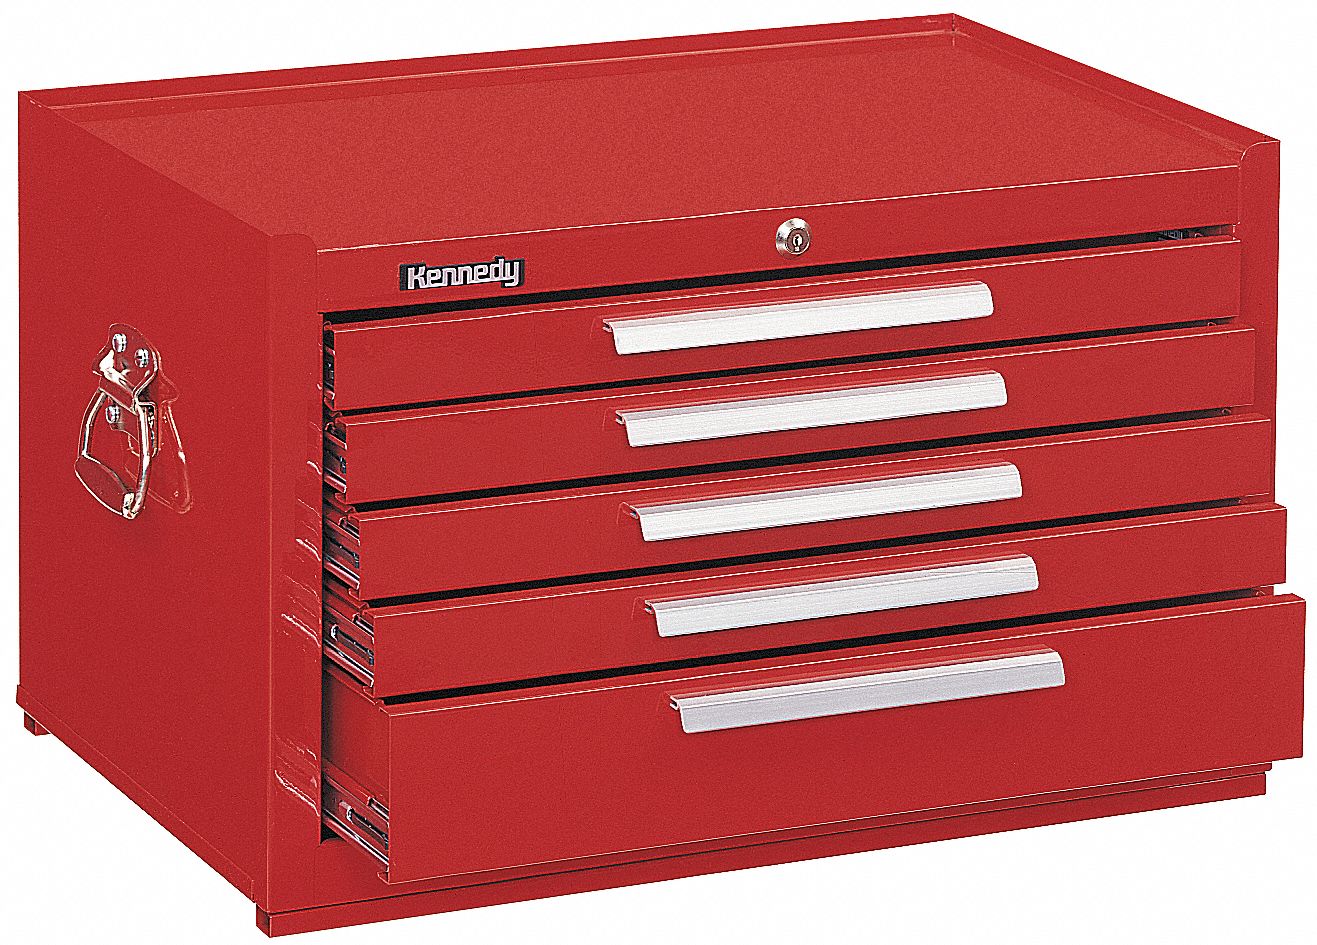 KENNEDY Red Top Chest, 27" Width x 18"  Depth x 16 5/8" Height, Number of Drawers: 5   Tool Chests and Side Cabinets   33M647|285XR